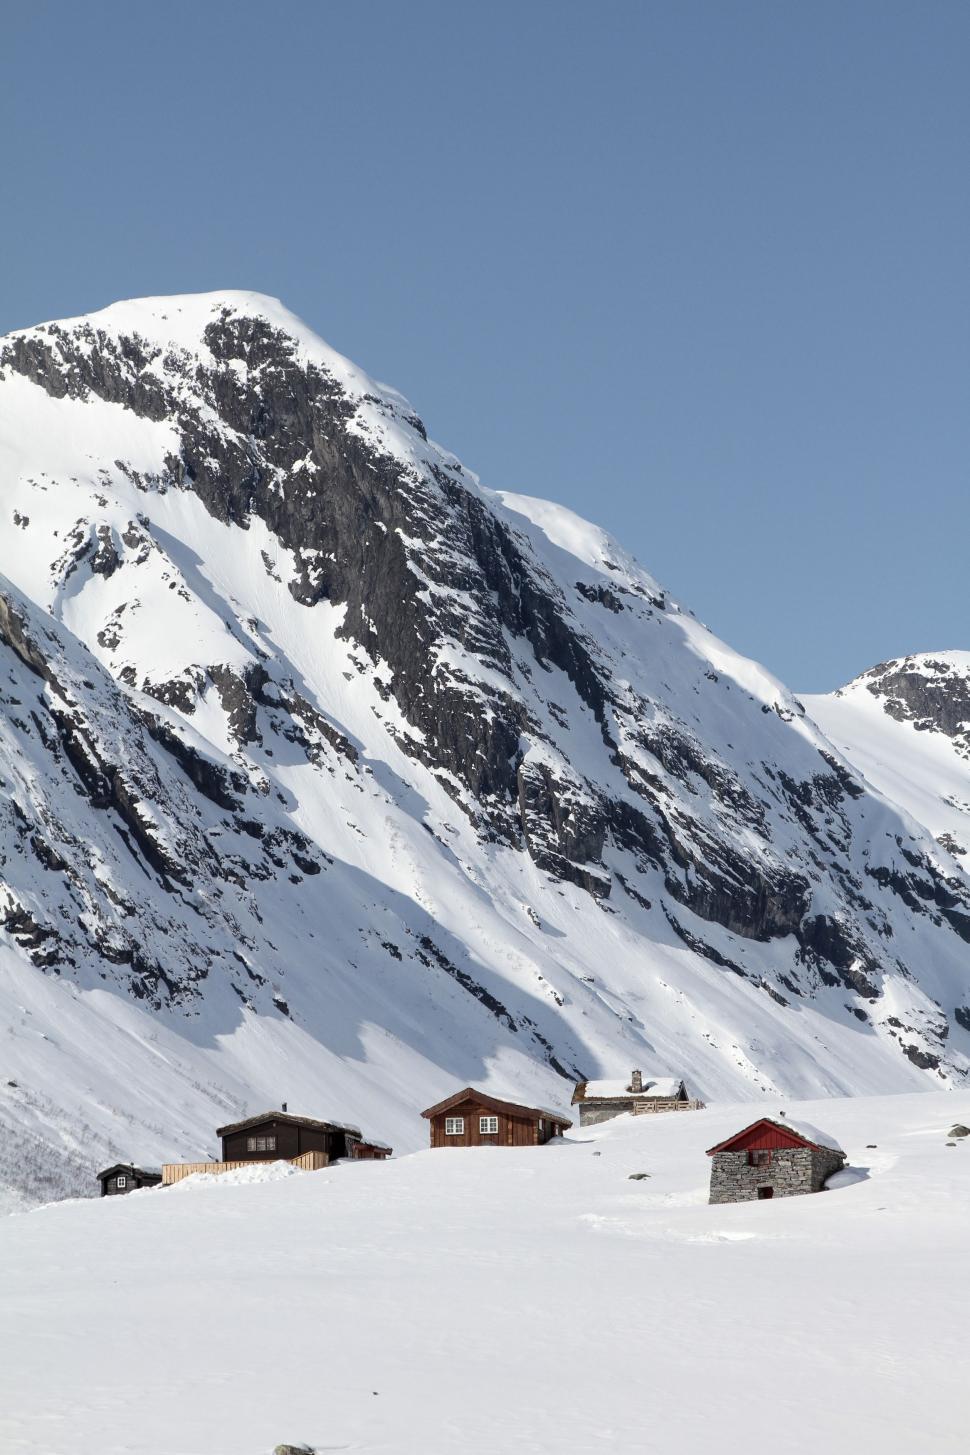 Free Image of Snow Covered Mountain With Houses in Foreground 